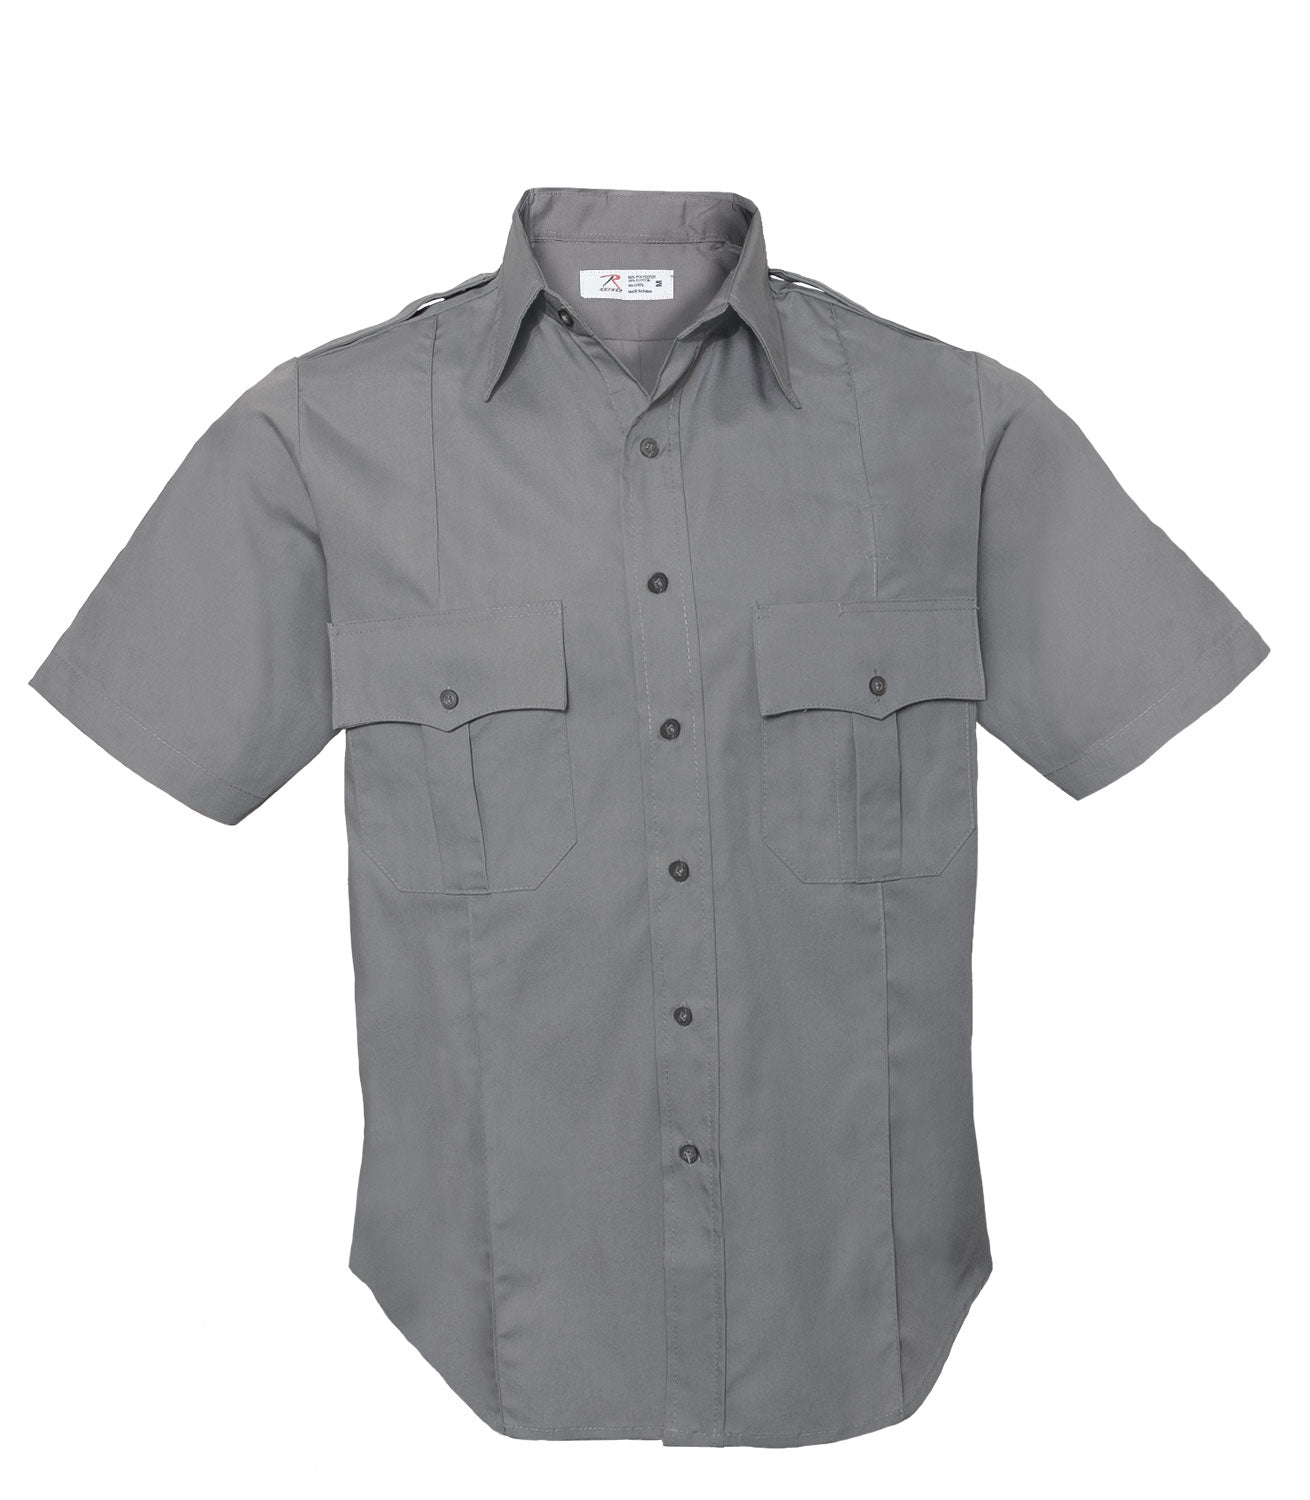 [Public Safety] Poly/Combed Cotton Poplin Weave Police & Security Short-Sleeve Uniform Shirts Grey